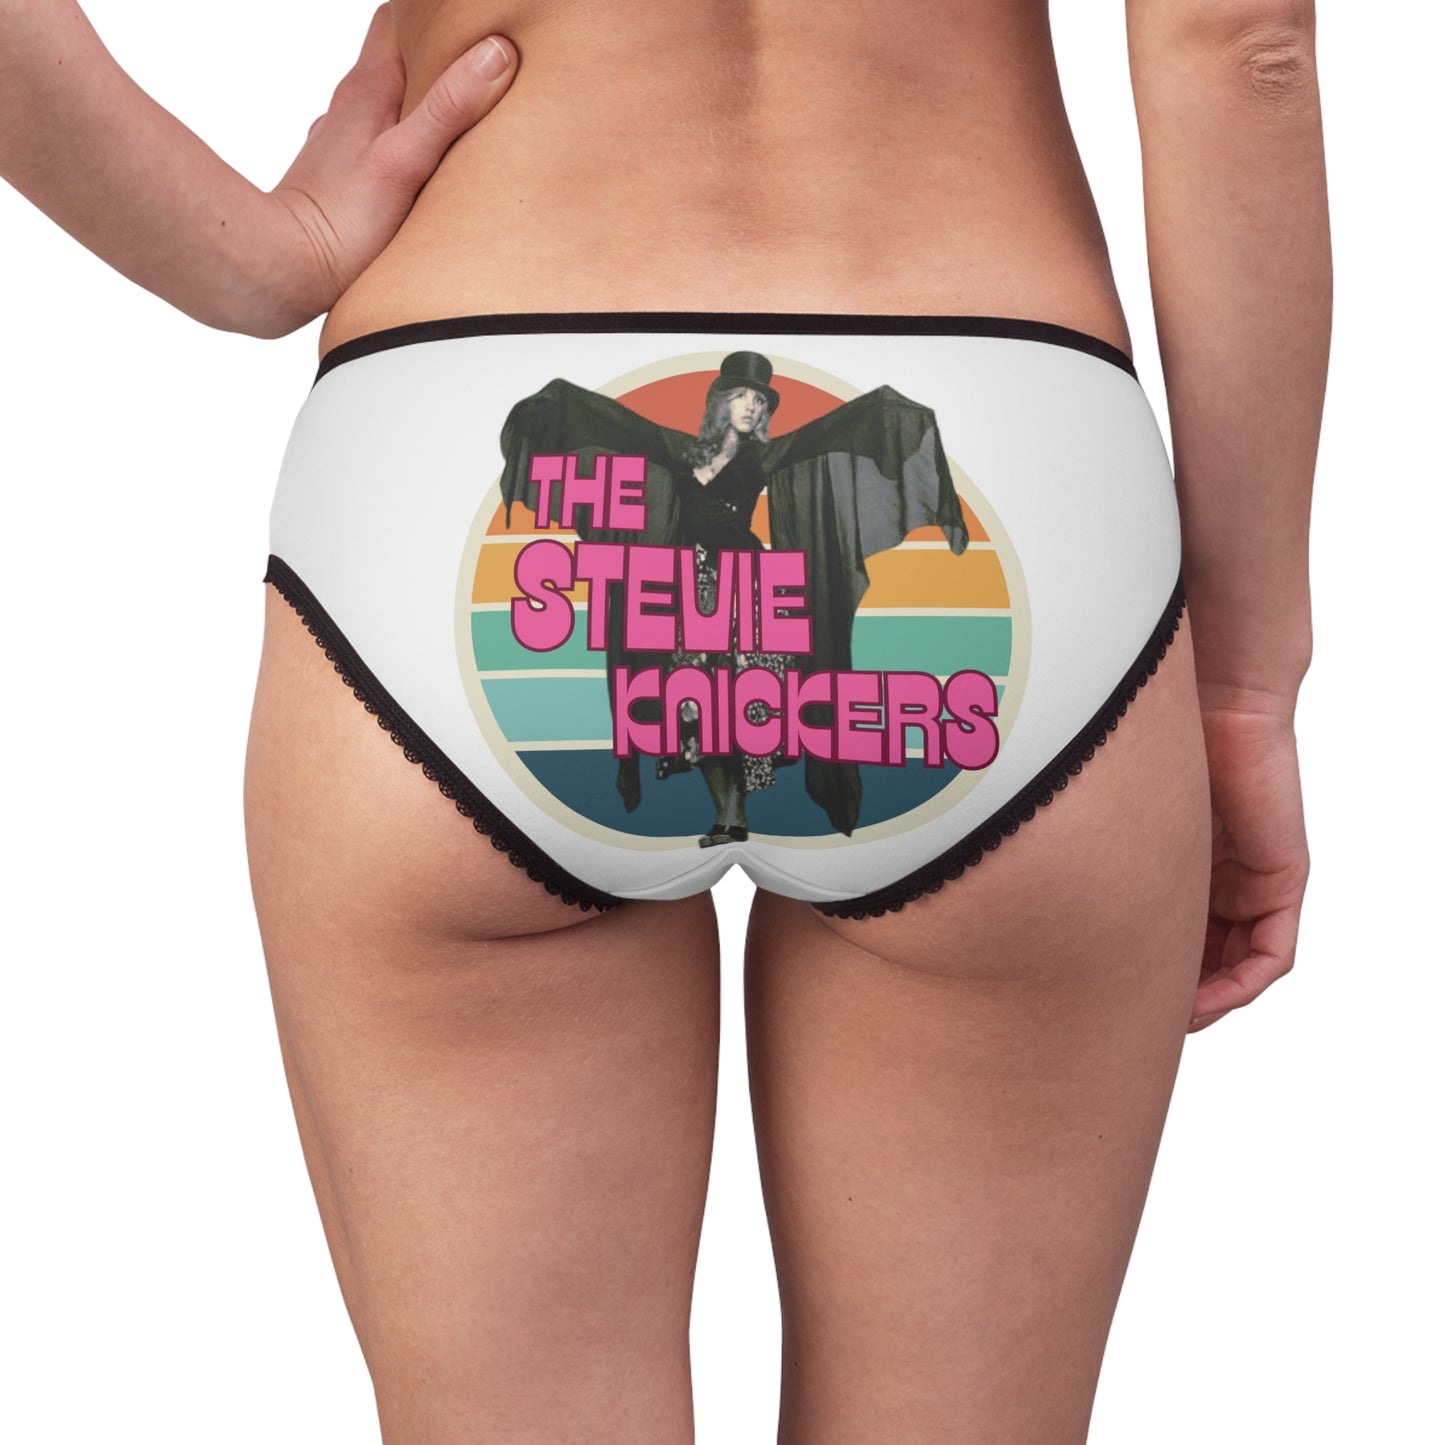 The Stevie kNICKers